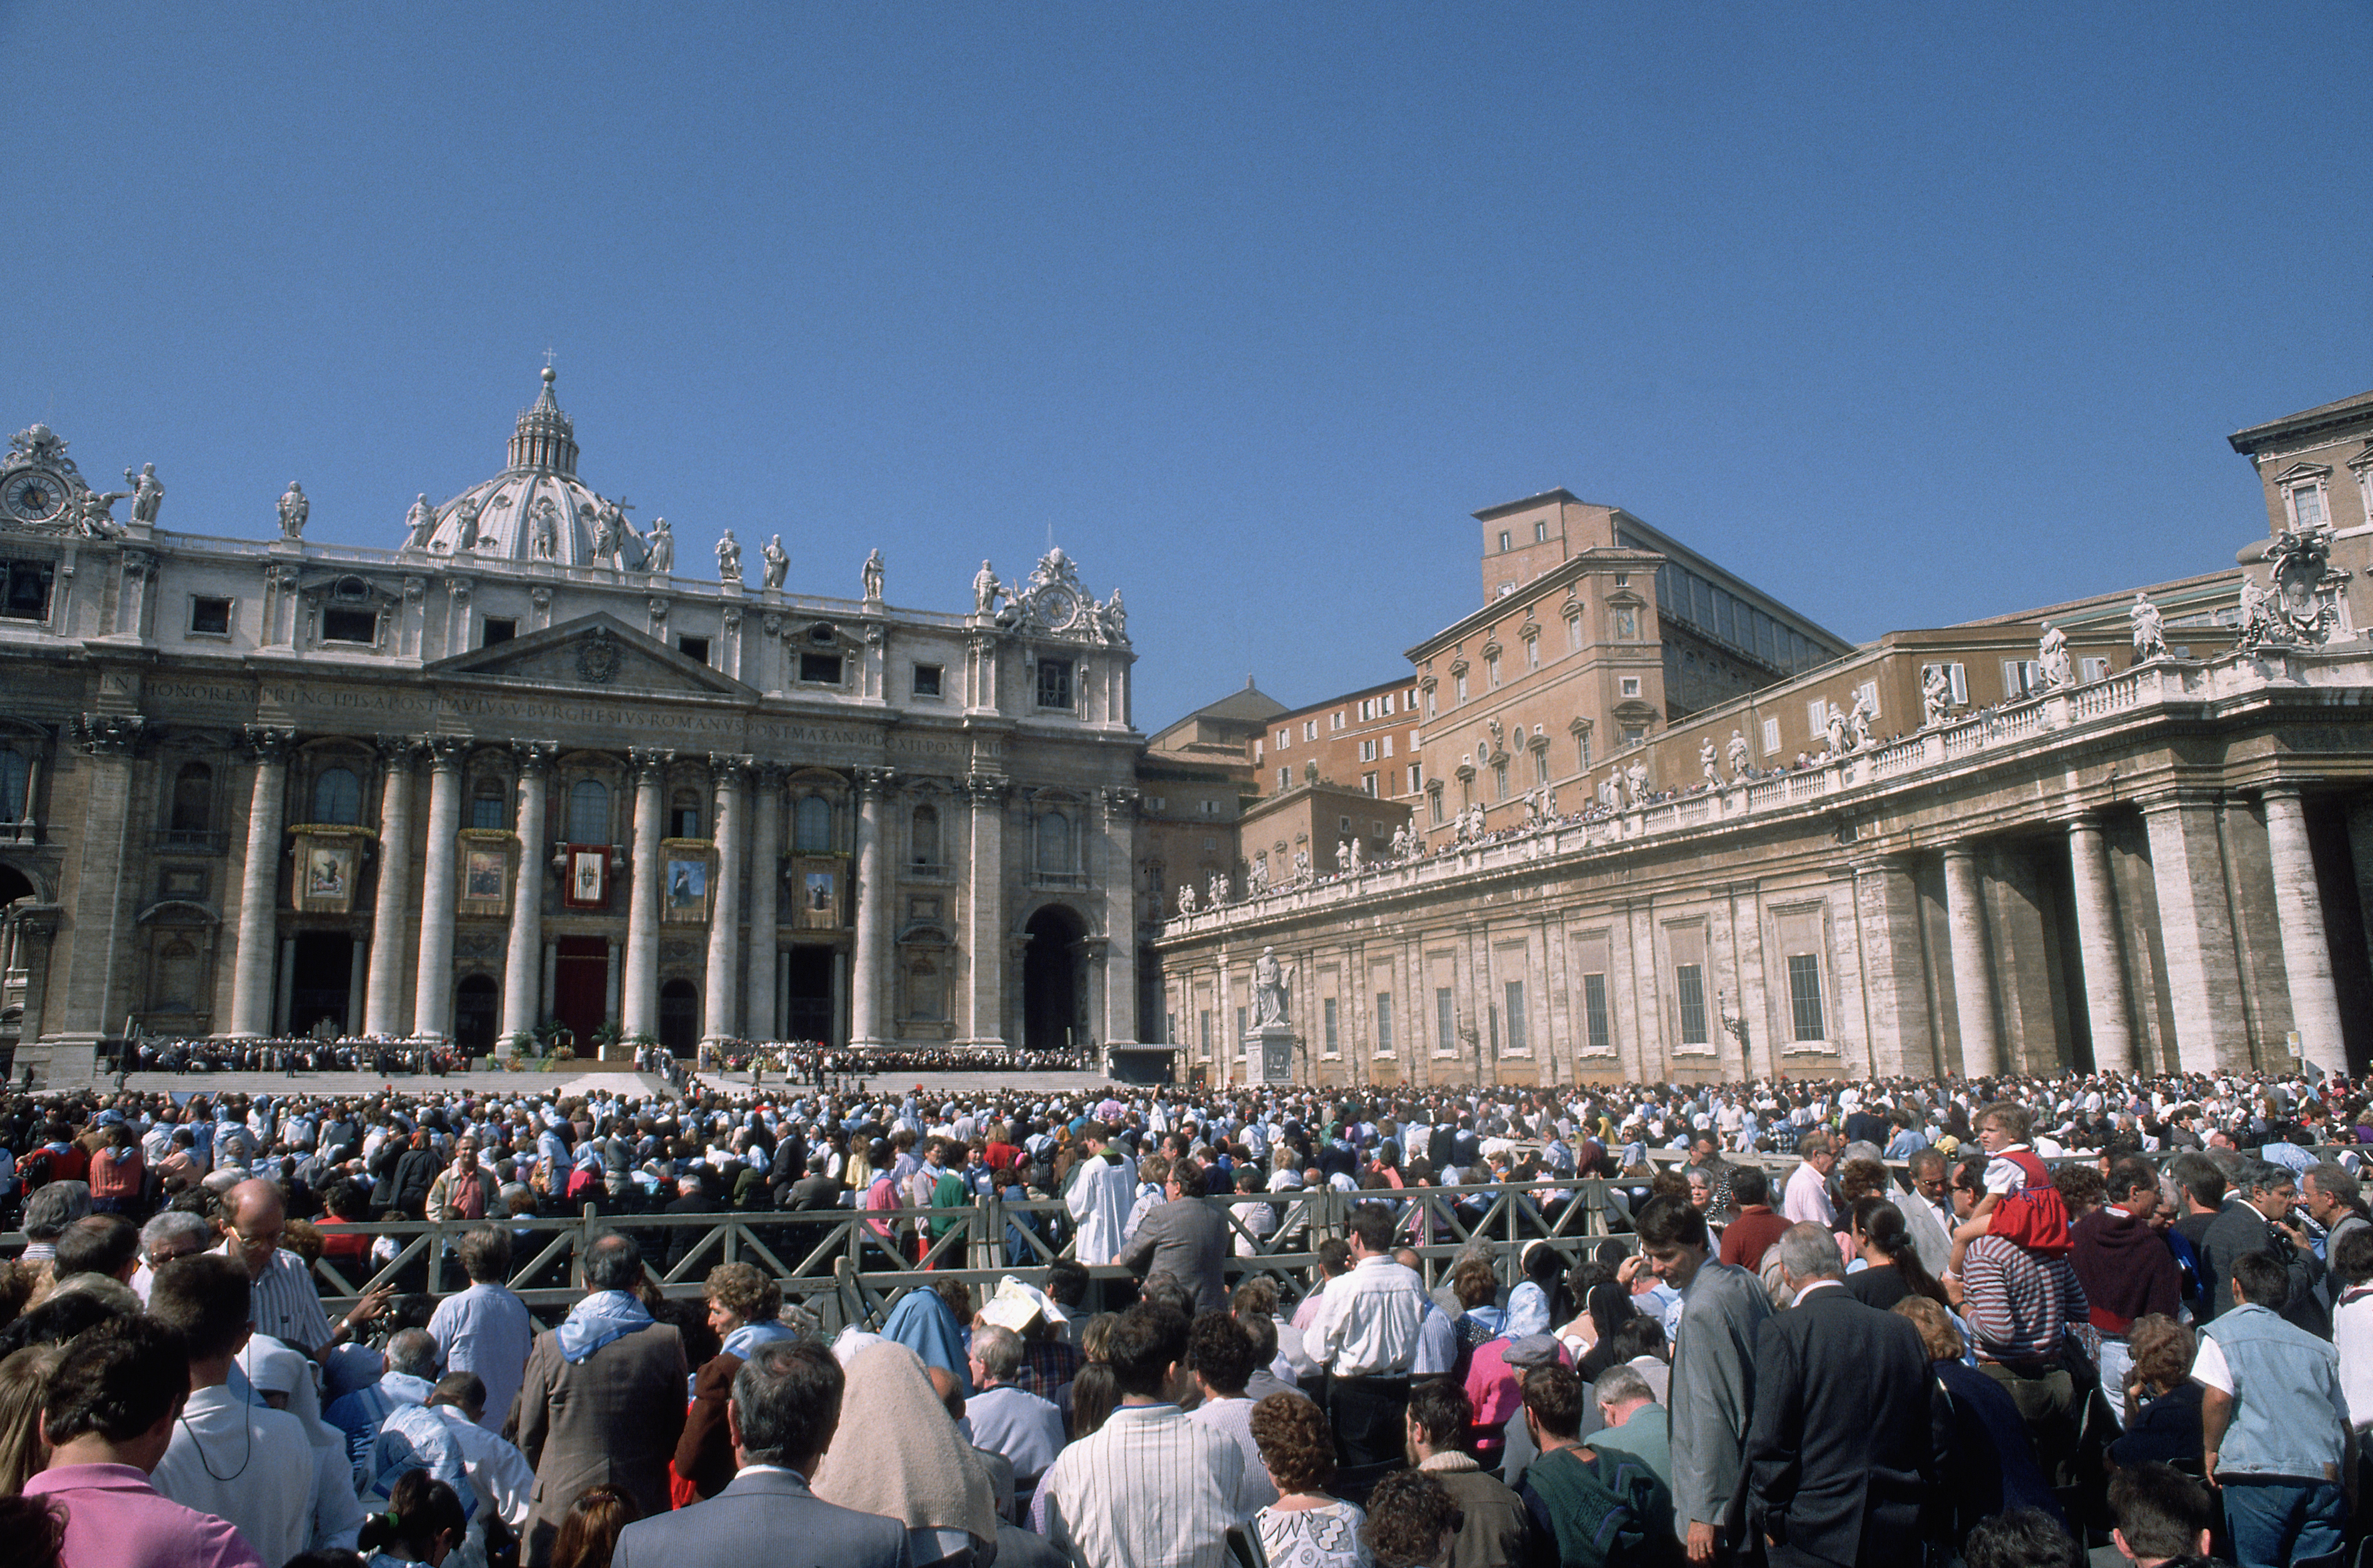 Crowded St. Peter&#x27;s Square at the Vatican with the basilica in the background. People gathered for an event